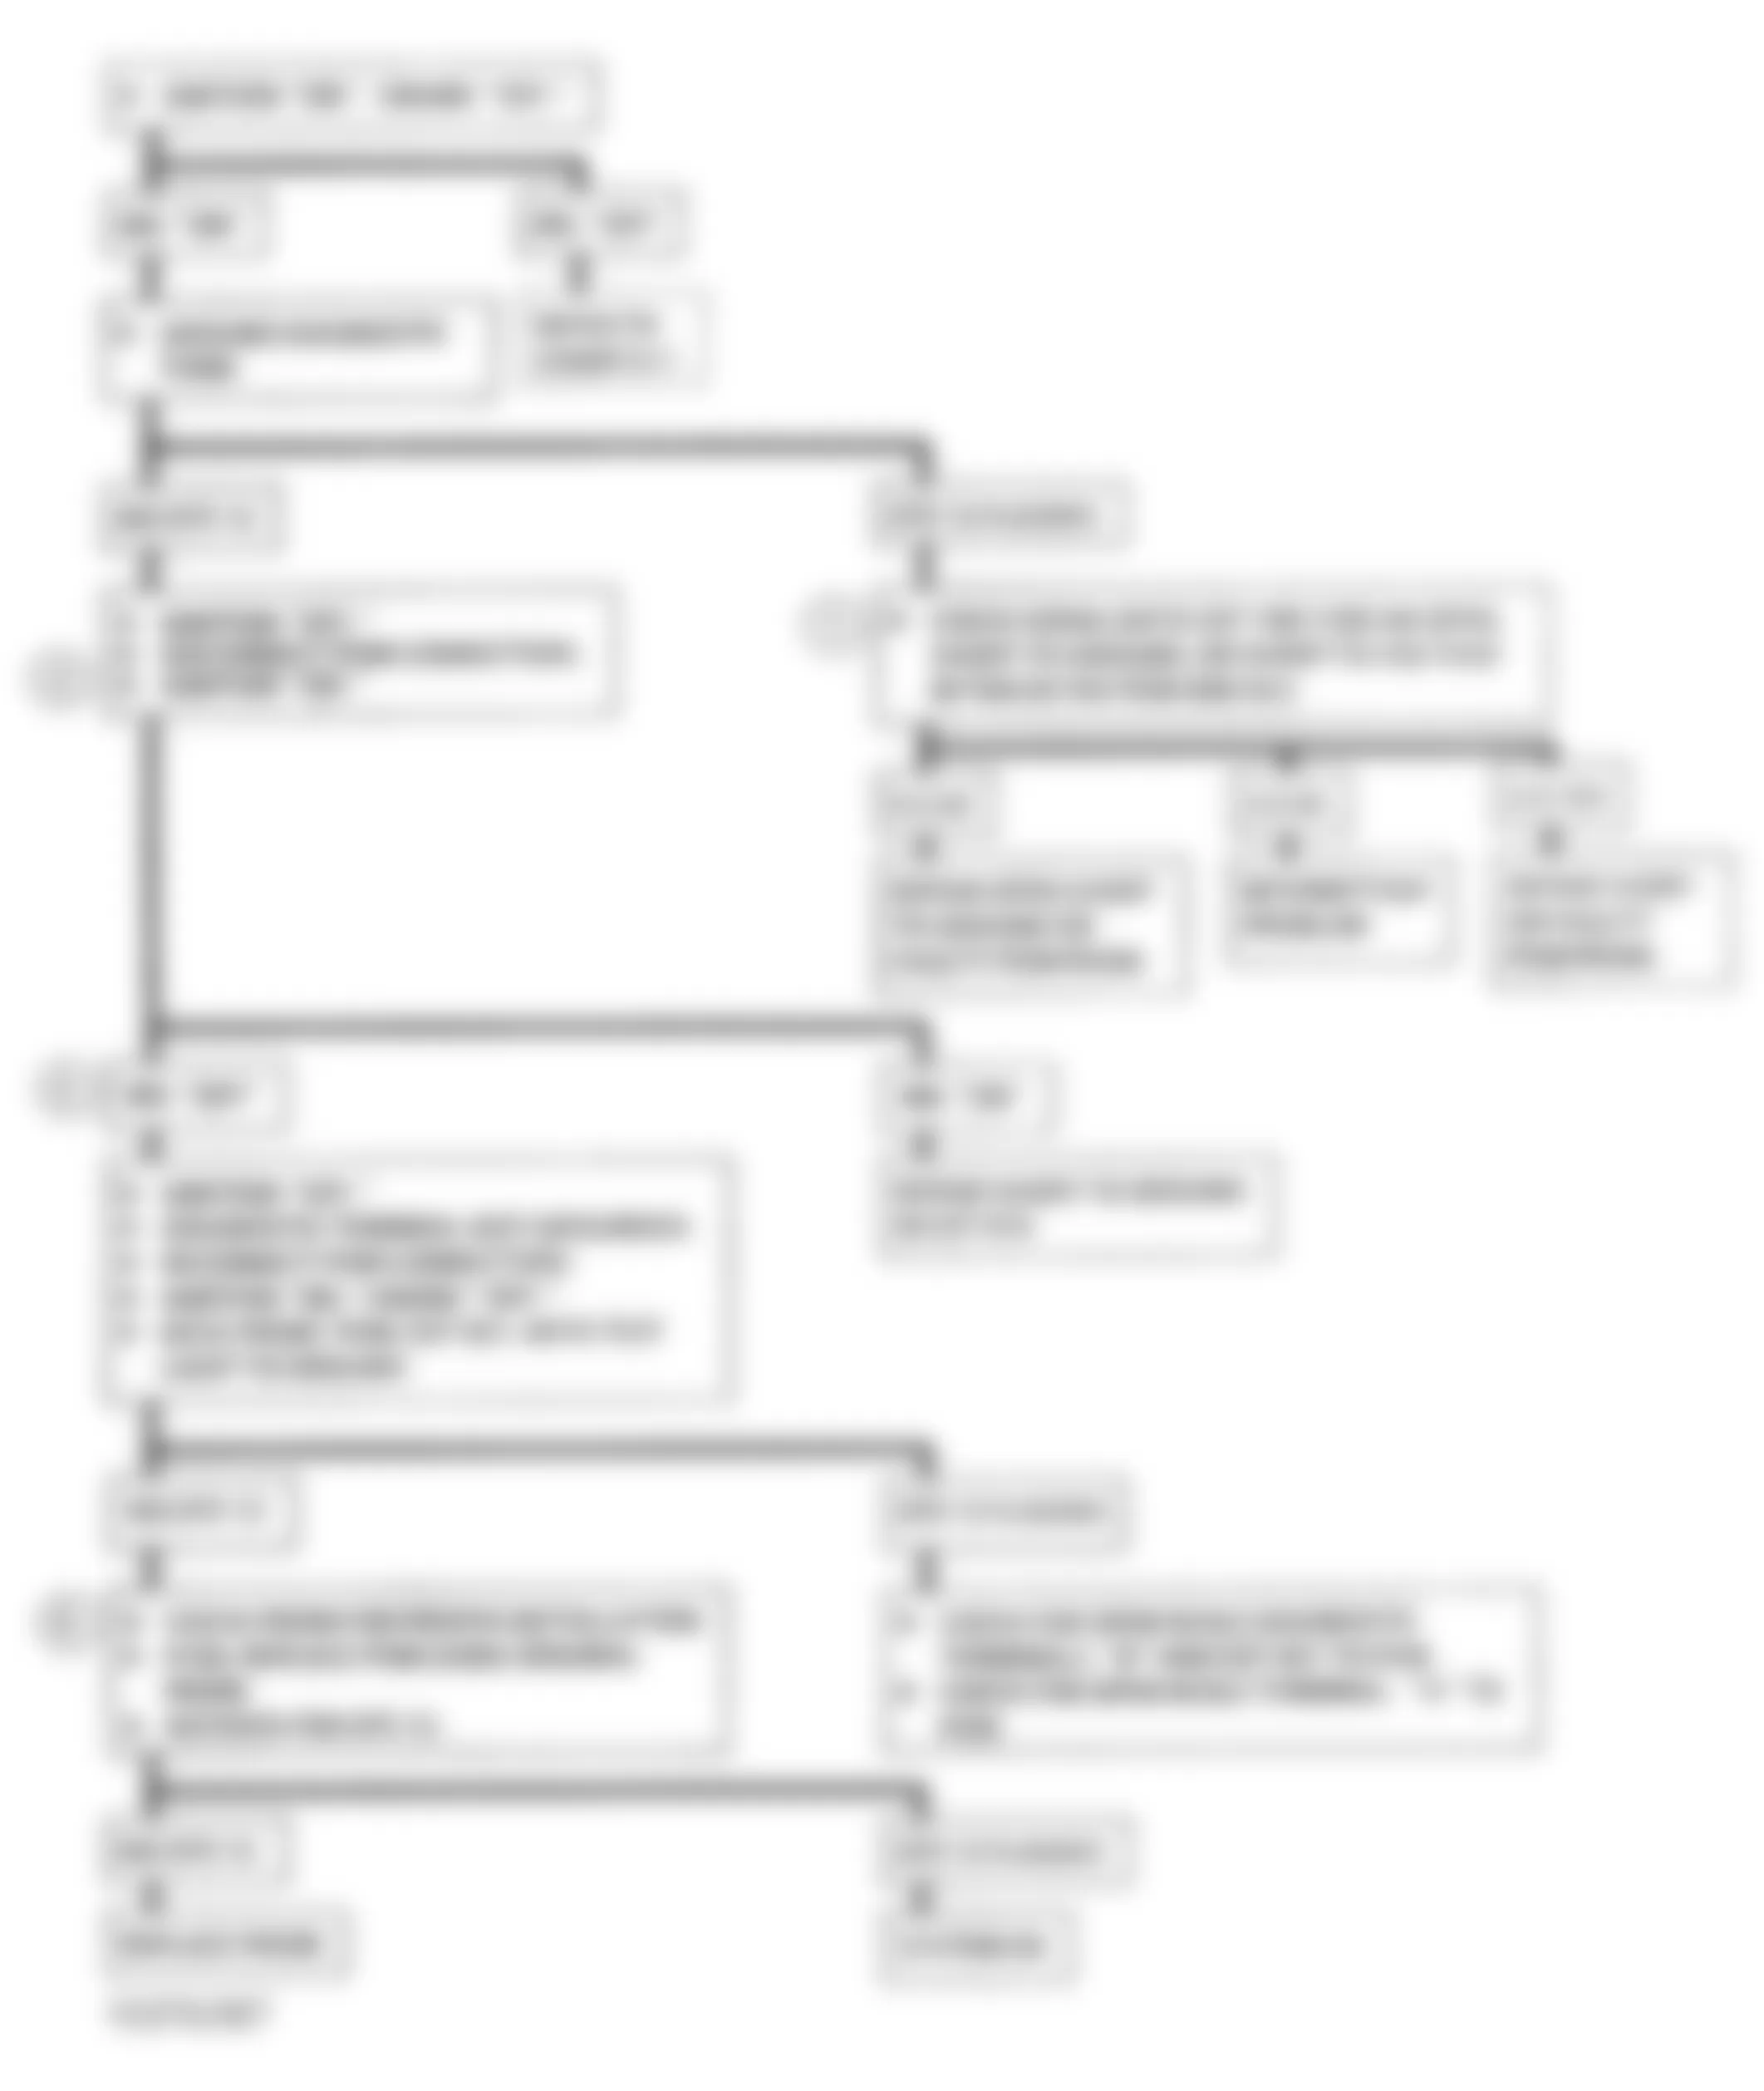 GMC Pickup C3500 1993 - Component Locations -  A-2, Flowchart, No DLC Data, MIL On All Time - A/T